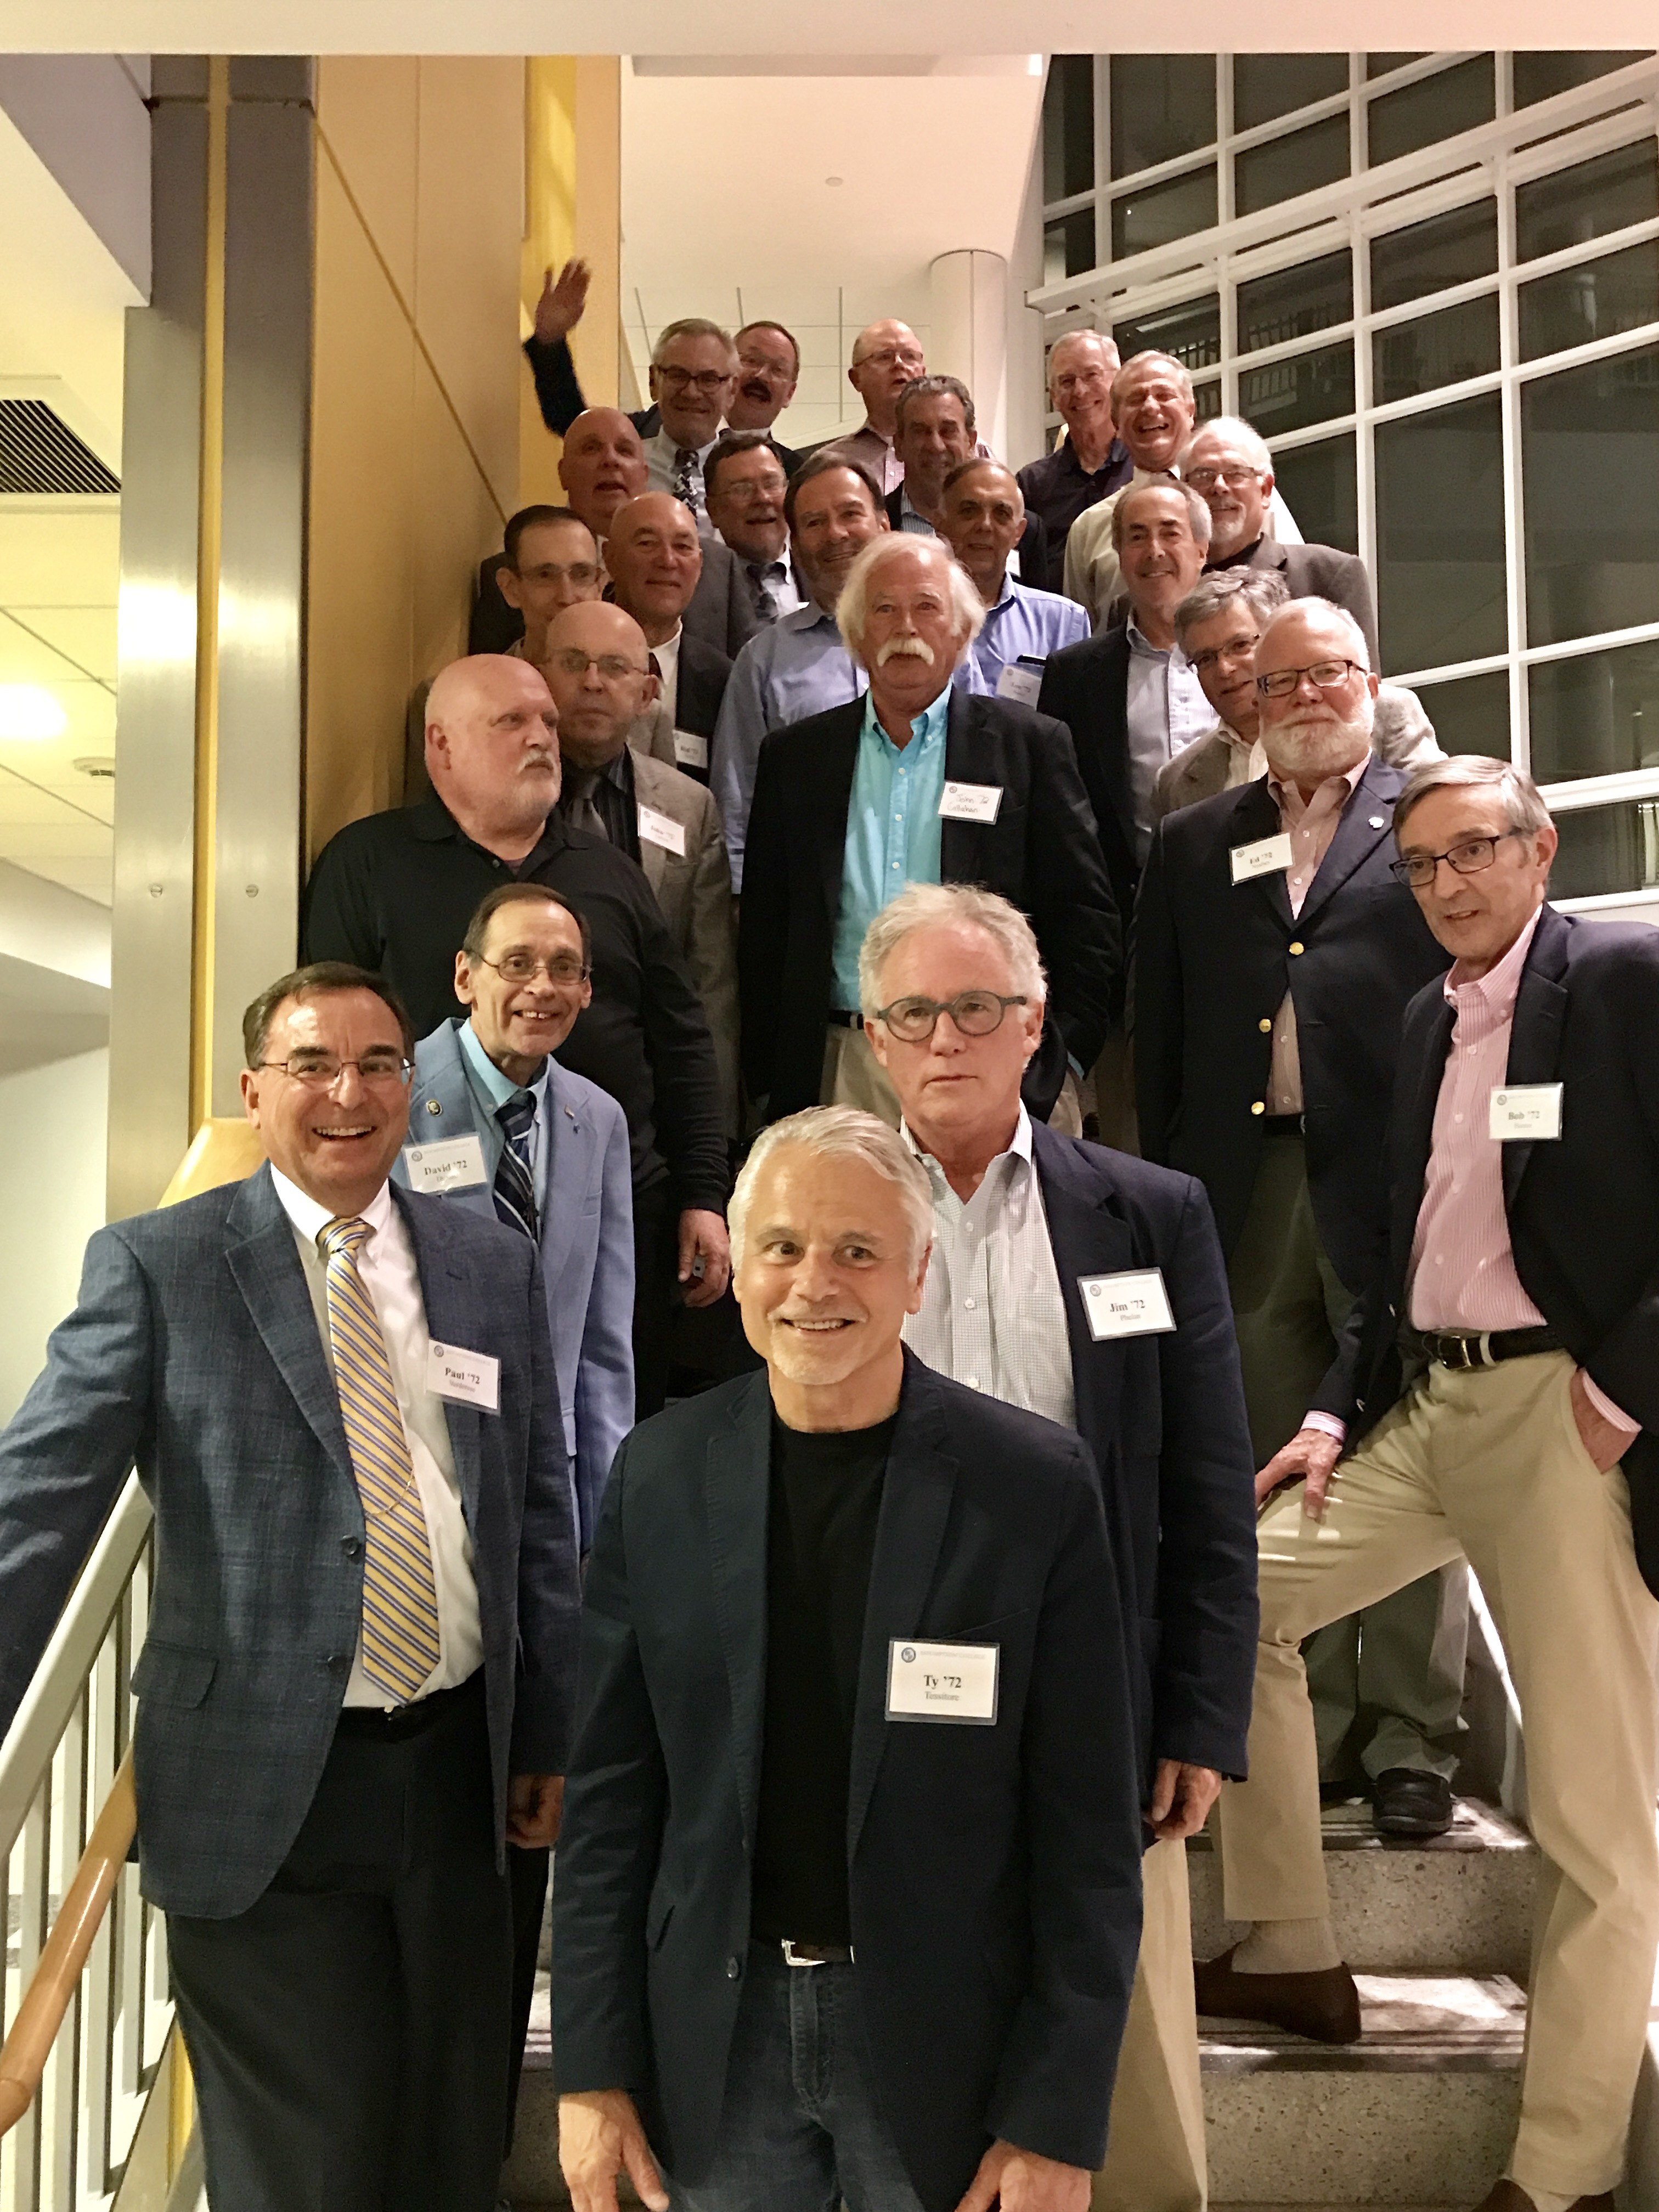 Members of the Assumption College Class of 1972 standing on the stairs in the Testa Science Center.